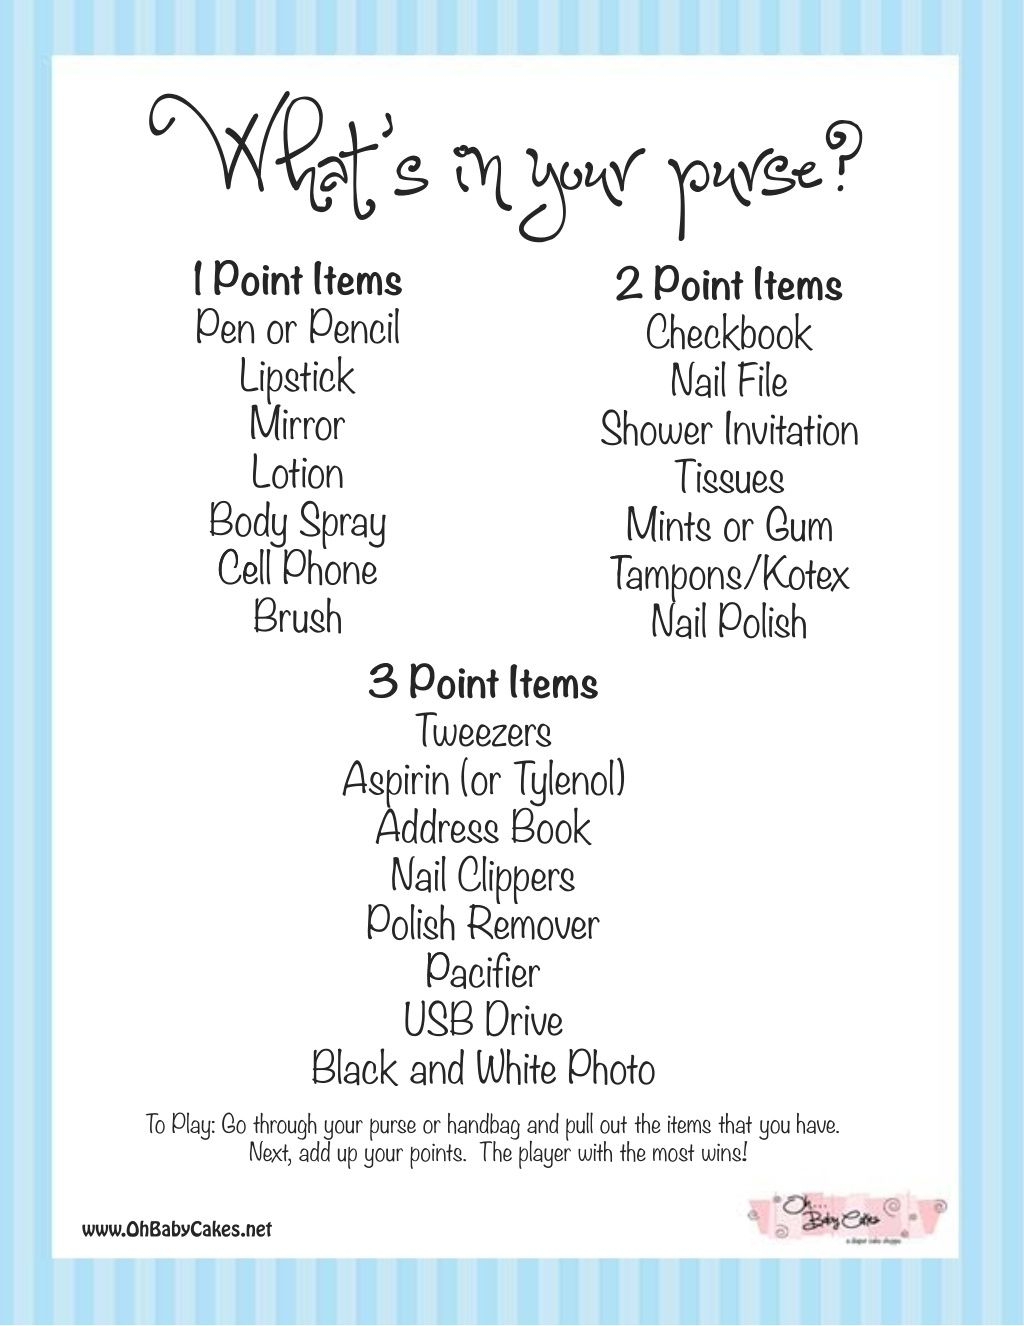 Whats-In-Your-Purse-Baby-Shower-Game-Blueww.ohbabycakes Via - Free Printable Baby Shower Game What&amp;amp;#039;s In Your Purse